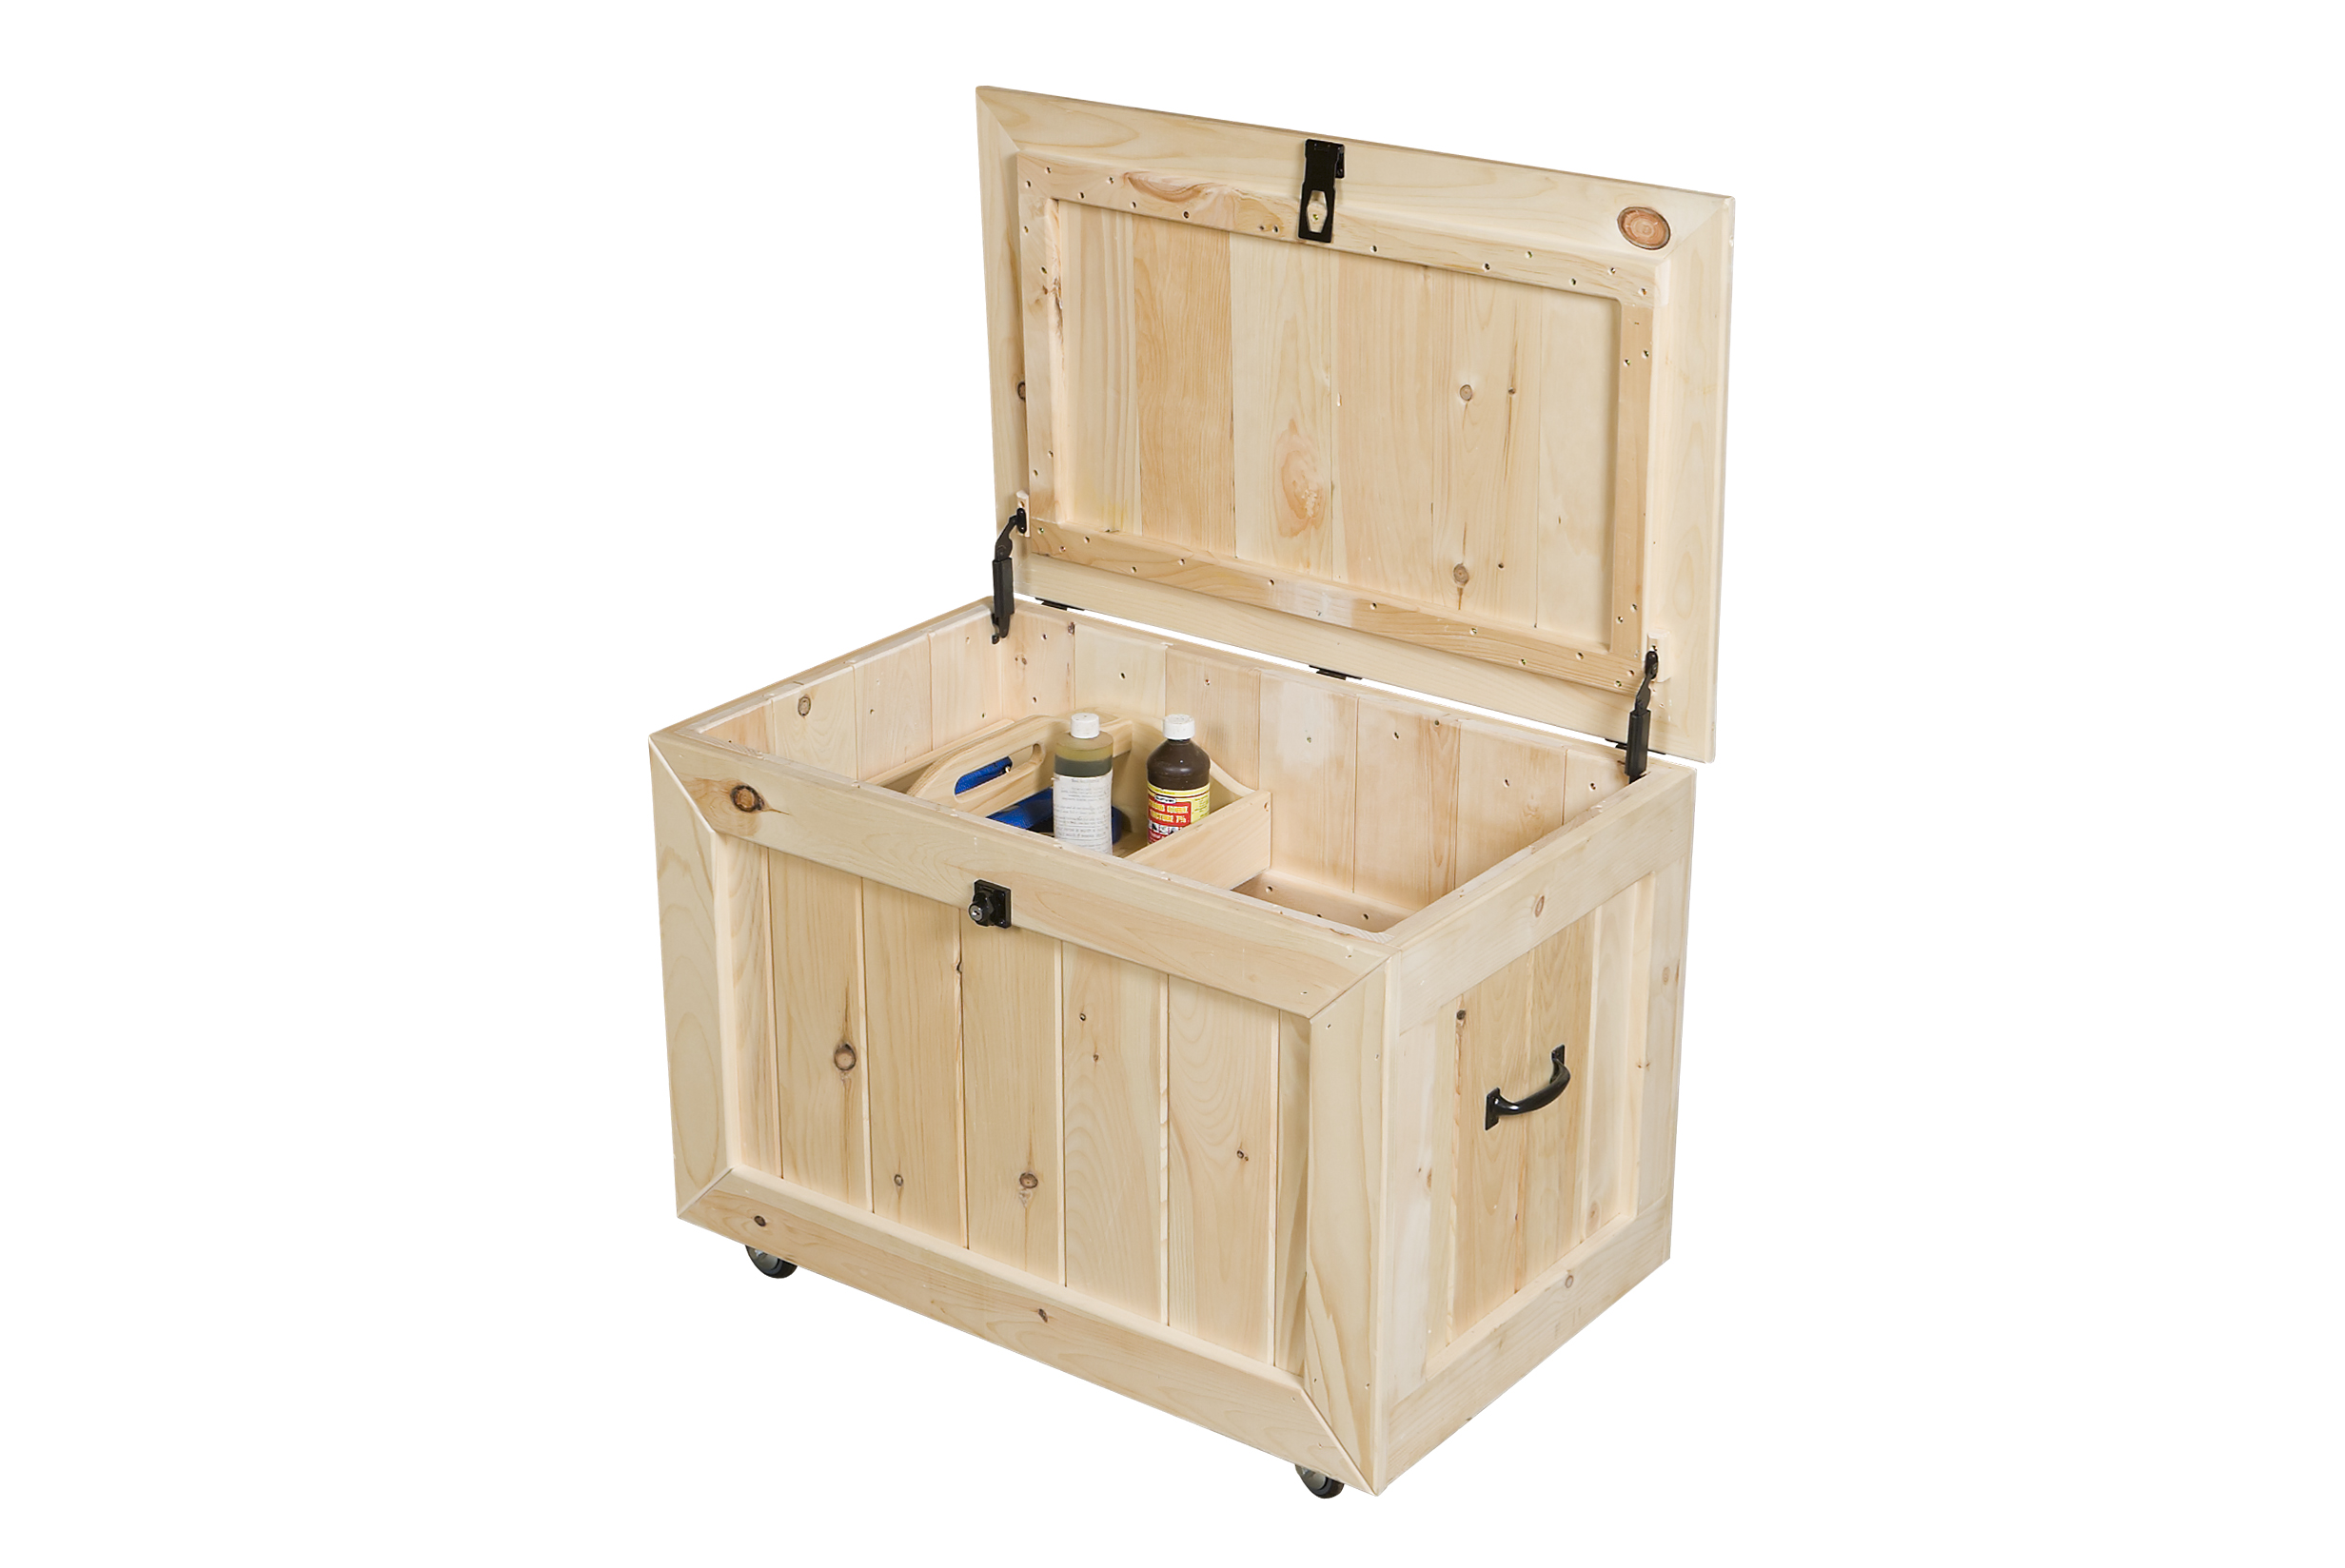 Horse Tack Boxes Online Discount Shop For Electronics,, 45% OFF